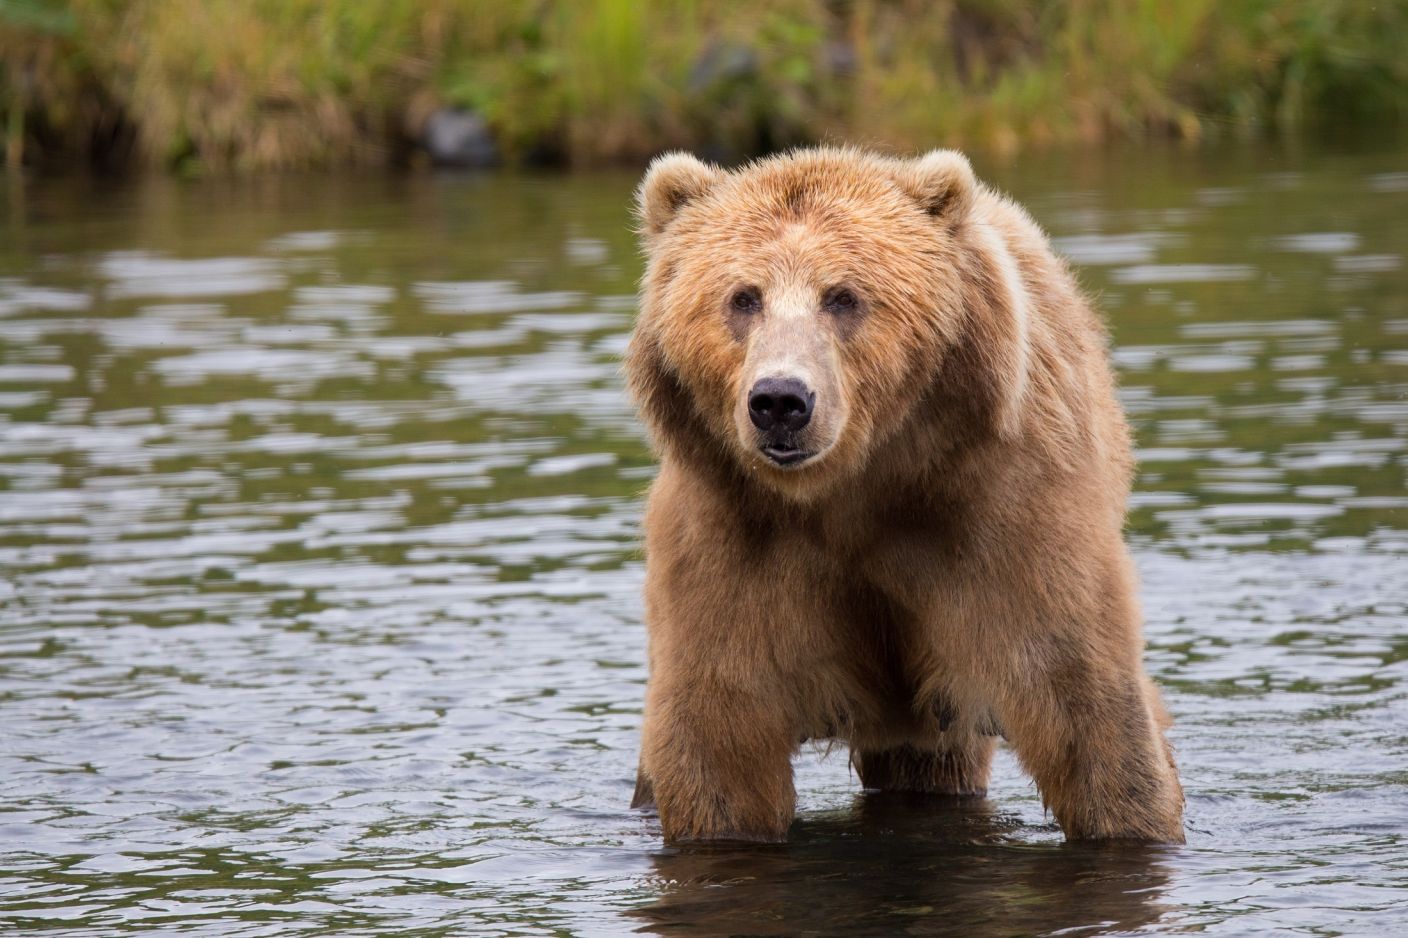 A grizzly stands in a body of water looking towards the camera.